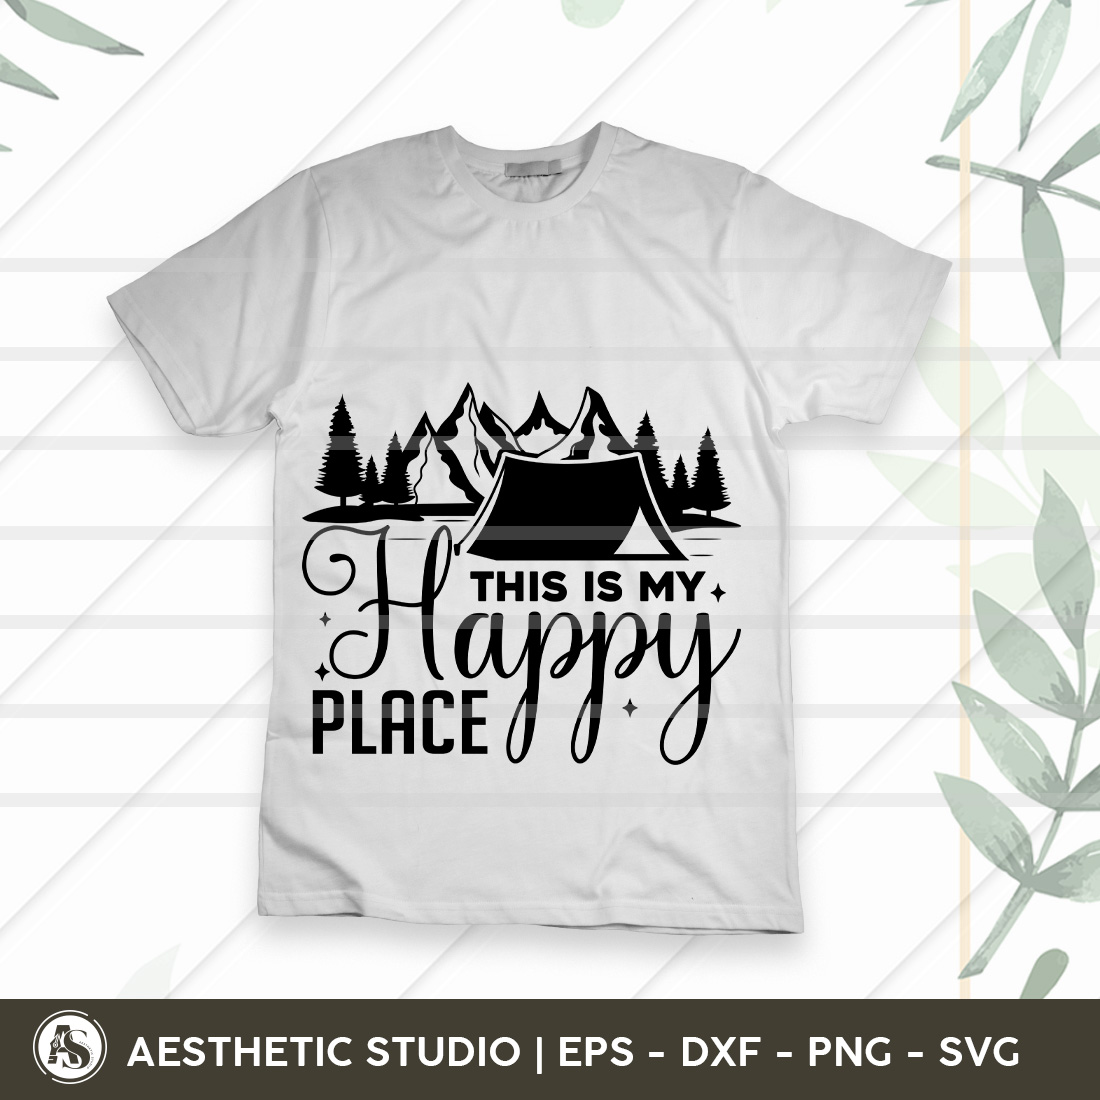 This Is My Happy Place, Camper, Adventure, Camp Life, Camping Svg, Typography, Camping Quotes, Camping Cut File, Funny Camping, Camping T-shirt Design, Eps, Dxf, Png, Cut file preview image.